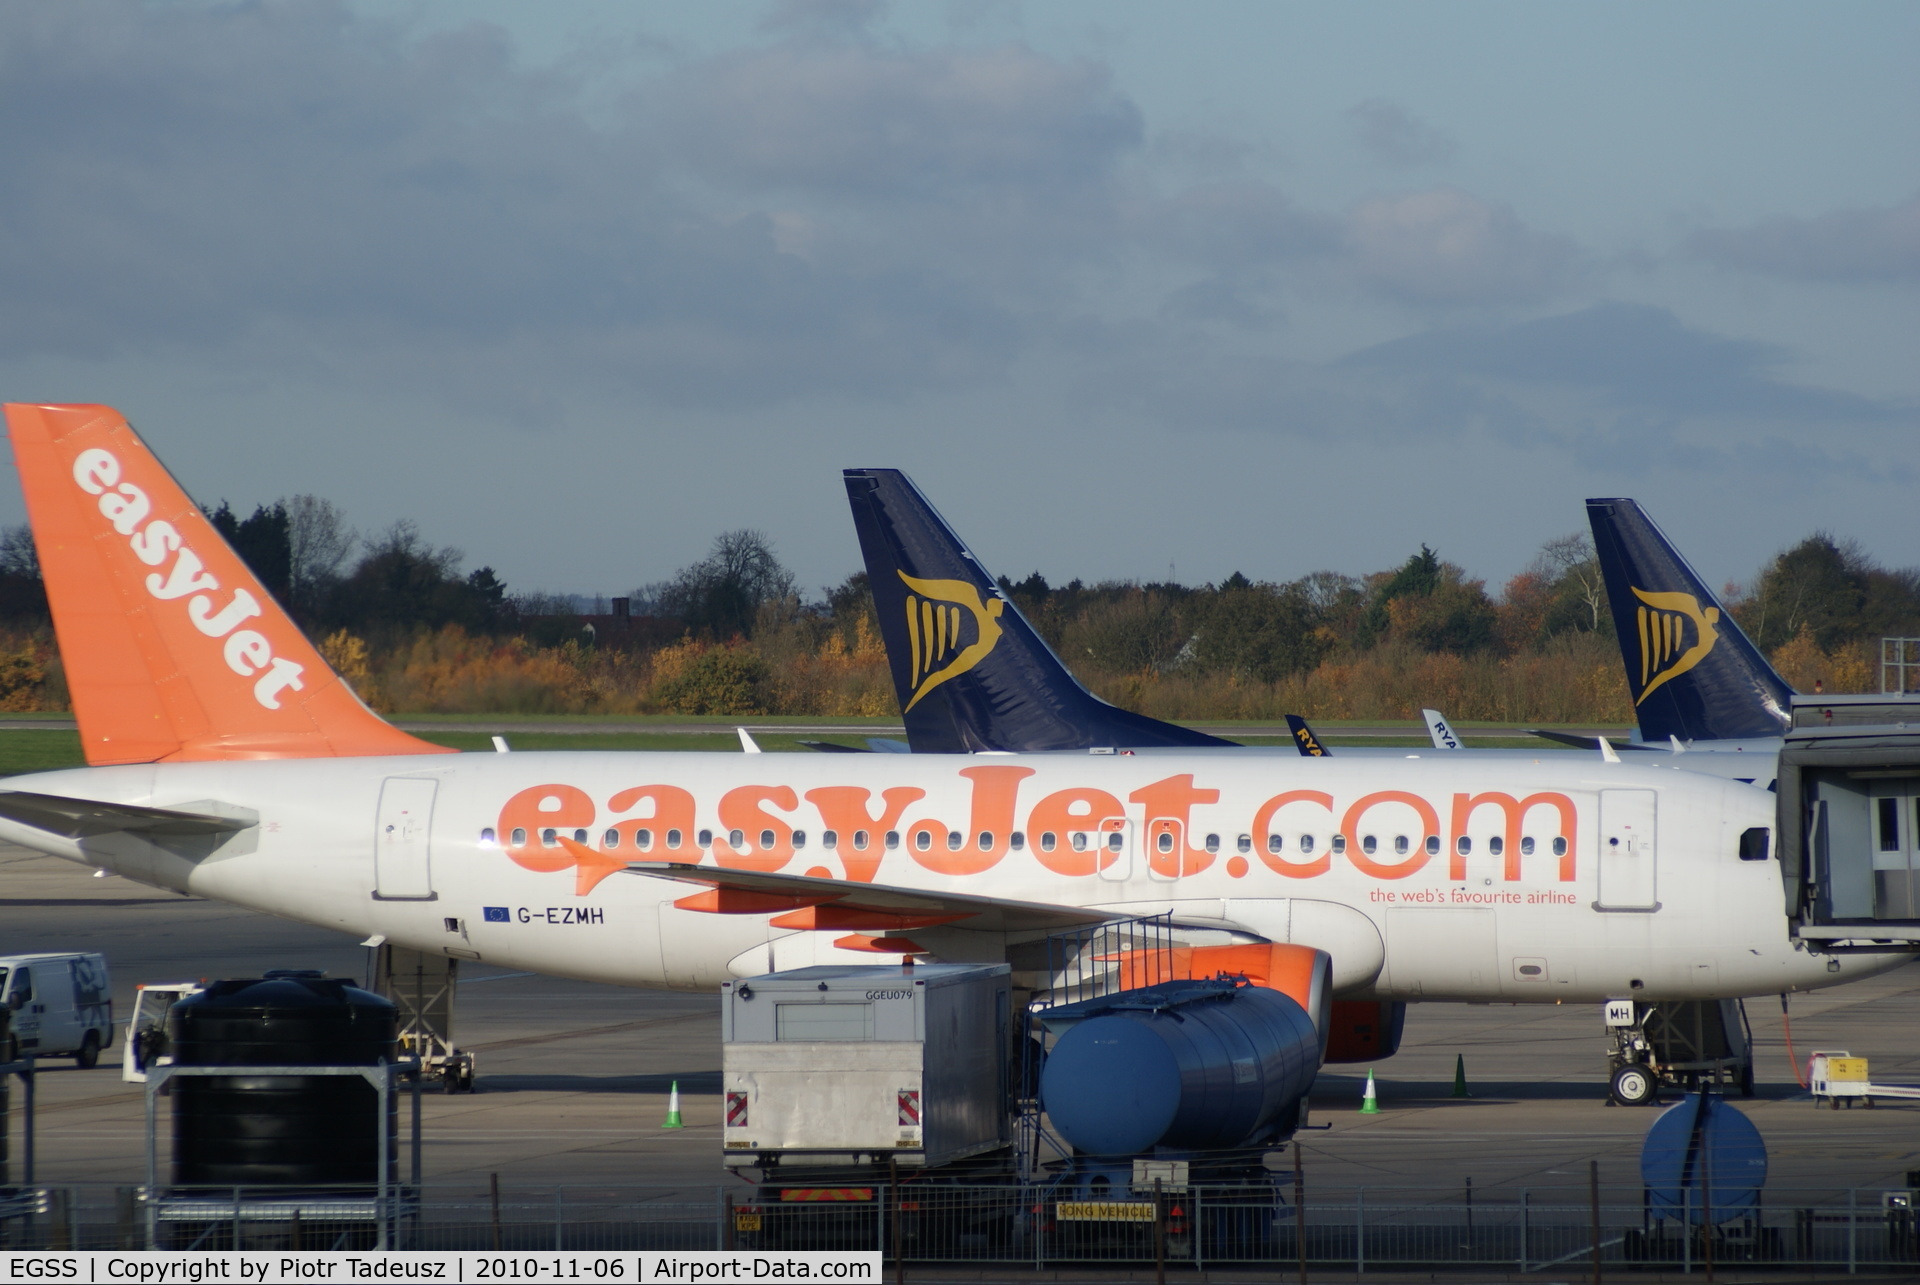 London Stansted Airport, London, England United Kingdom (EGSS) - EGSS